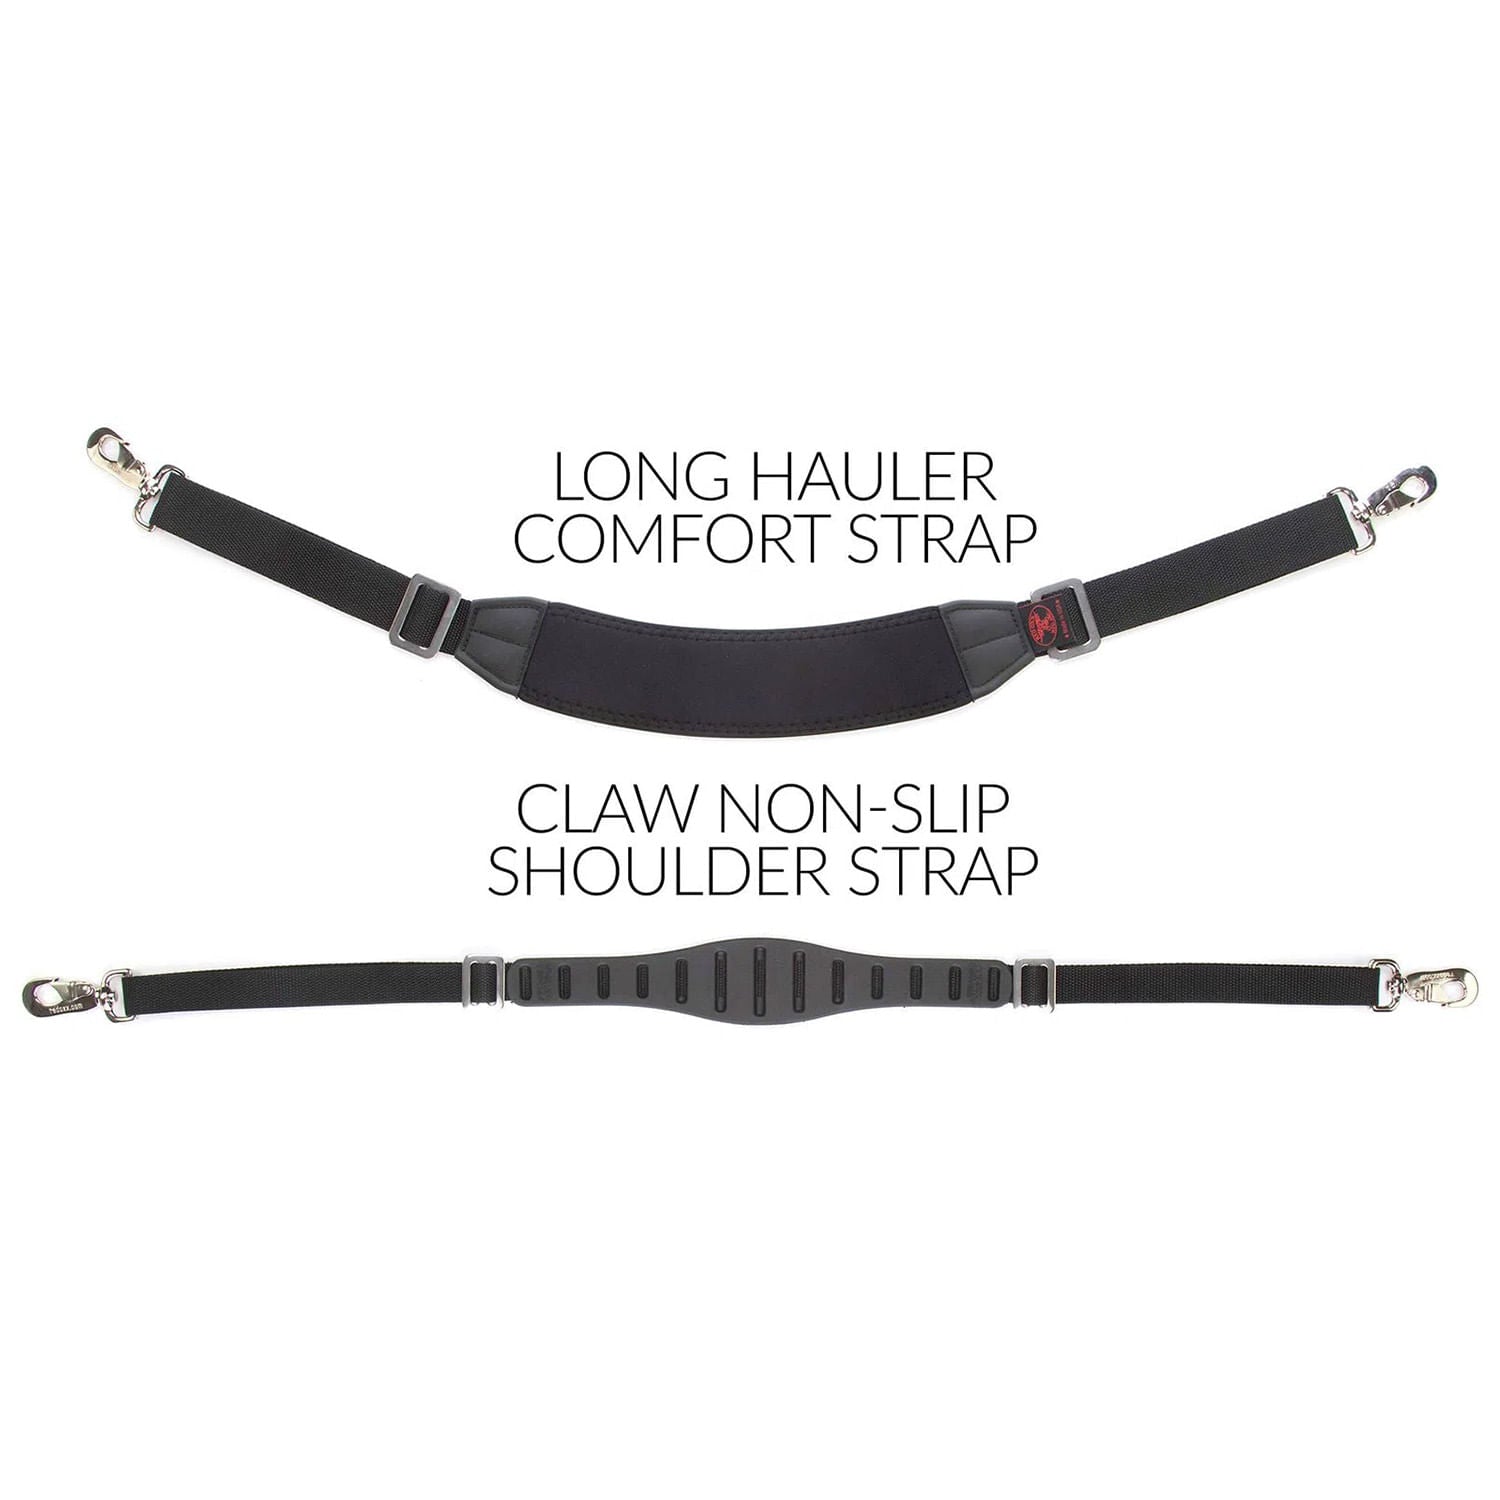 Long Hauler comfort strap compared to the Claw non slip shoulder strap.  